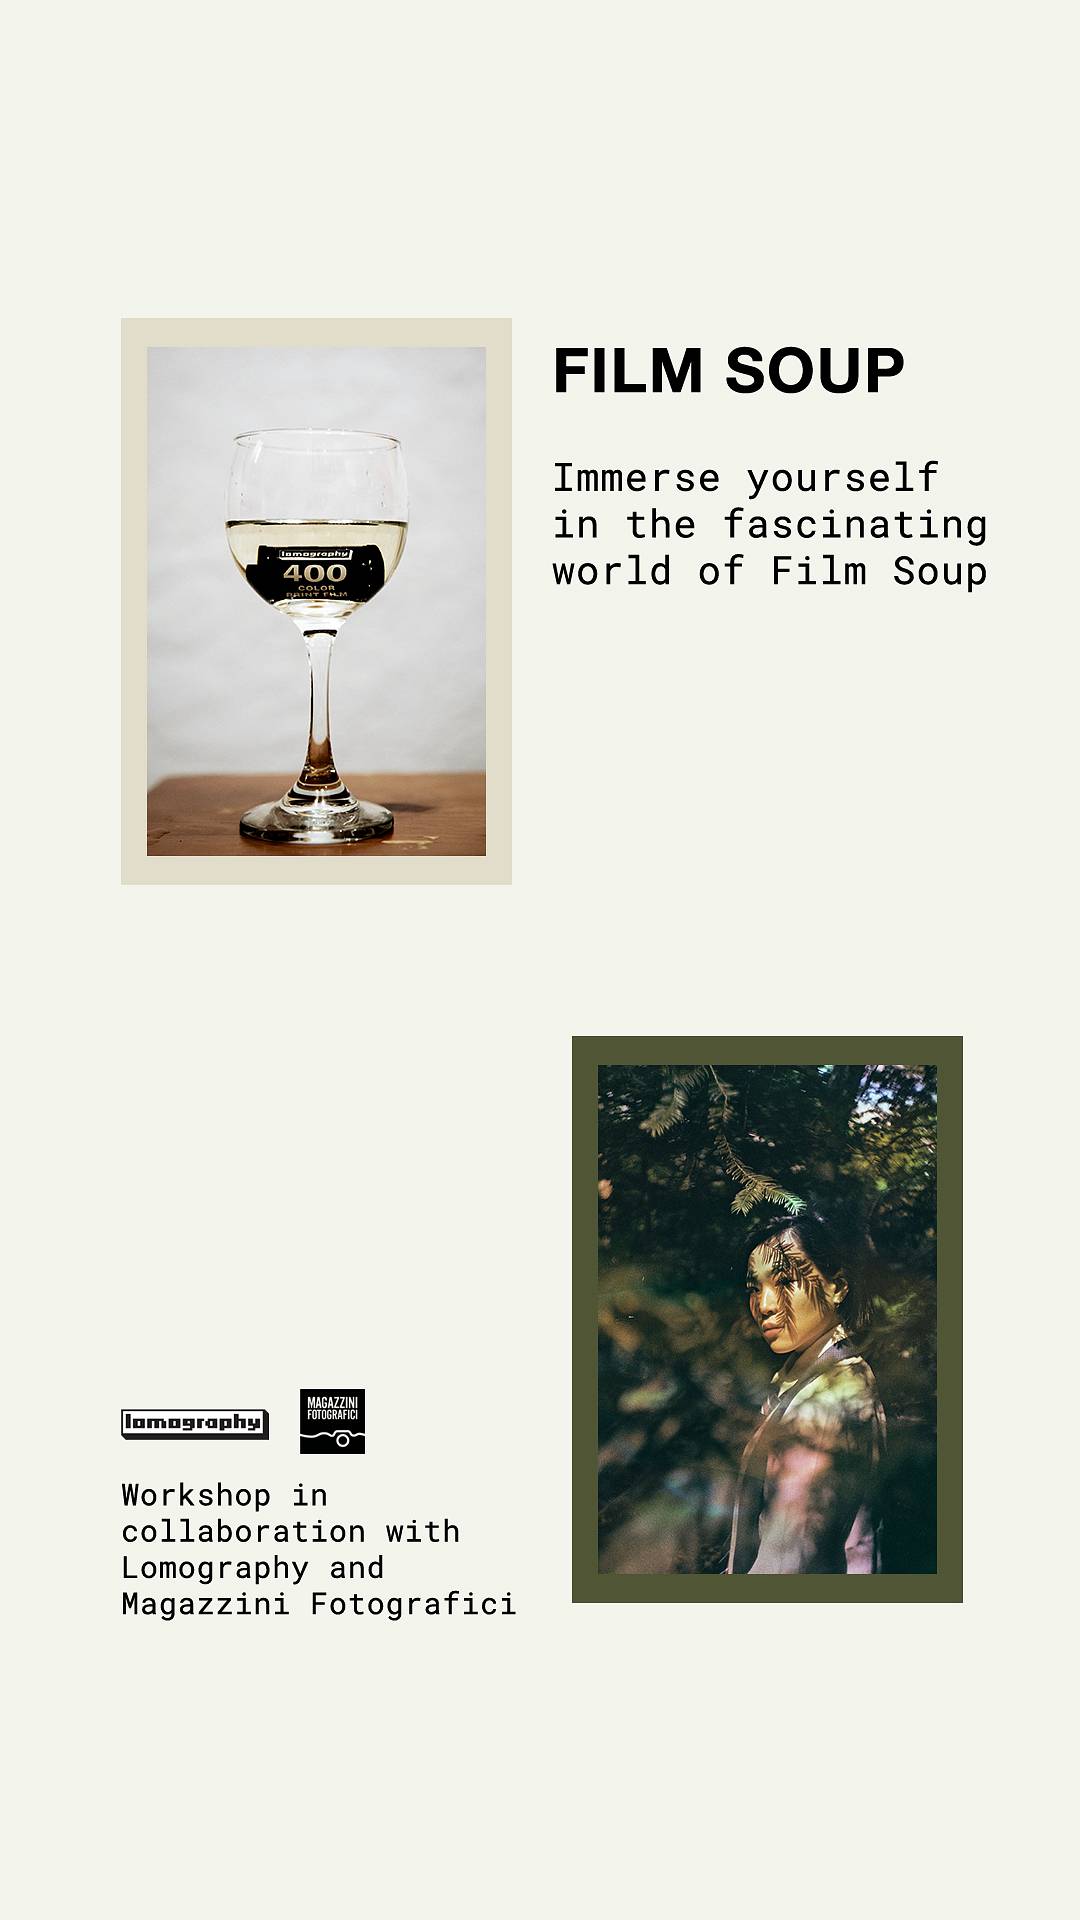 Immerse Yourself in the Fascinating World of Film Soup